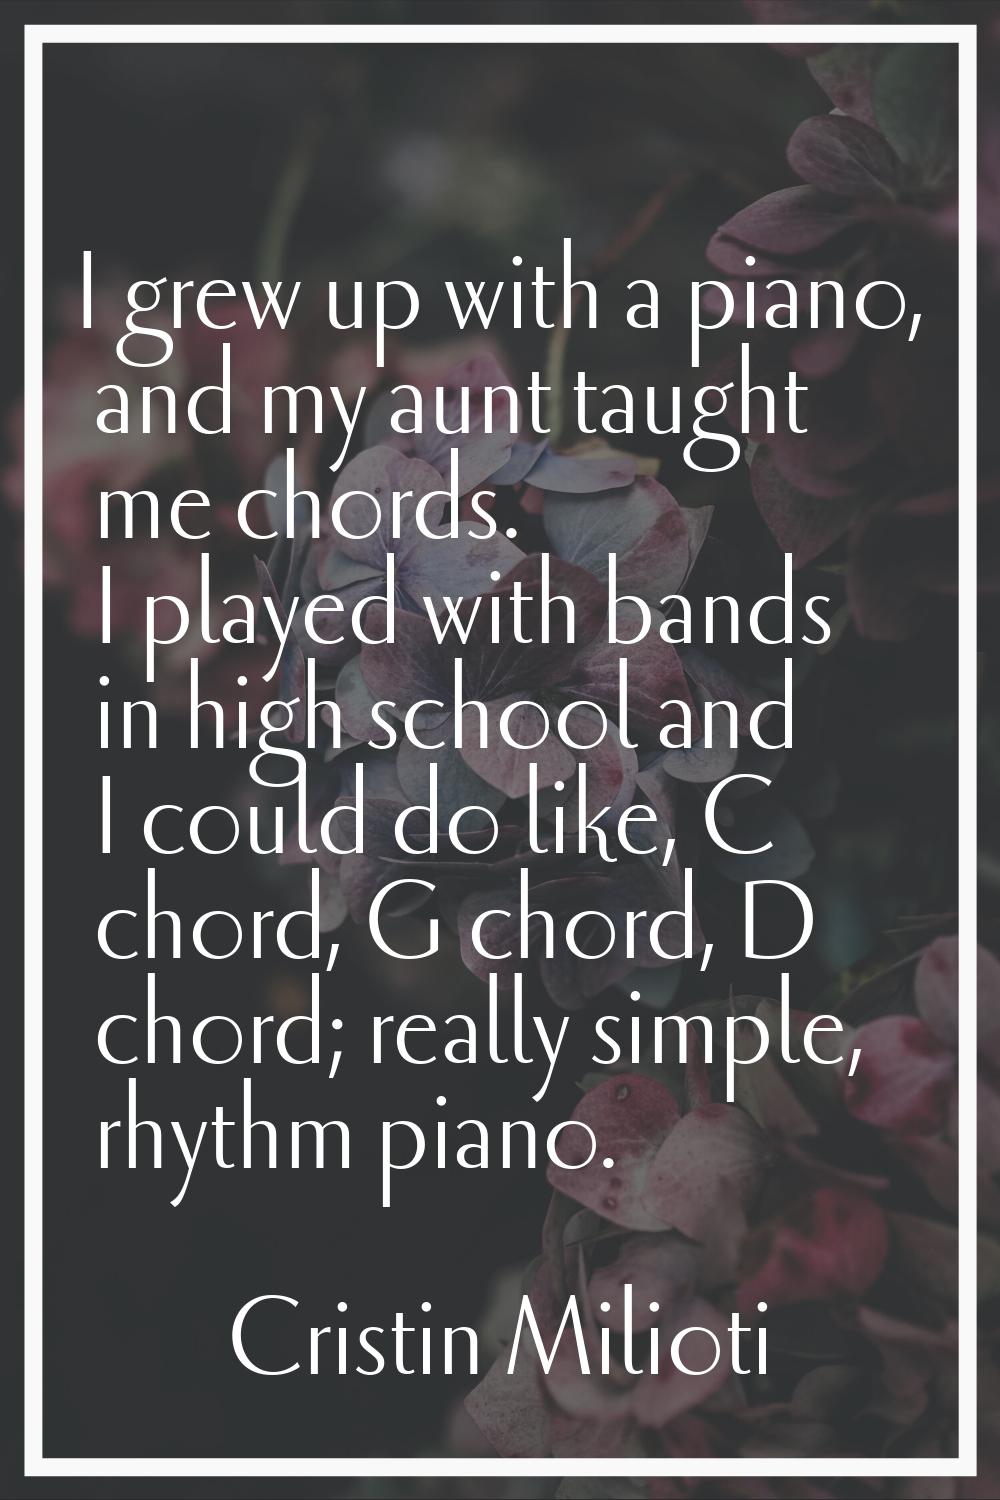 I grew up with a piano, and my aunt taught me chords. I played with bands in high school and I coul